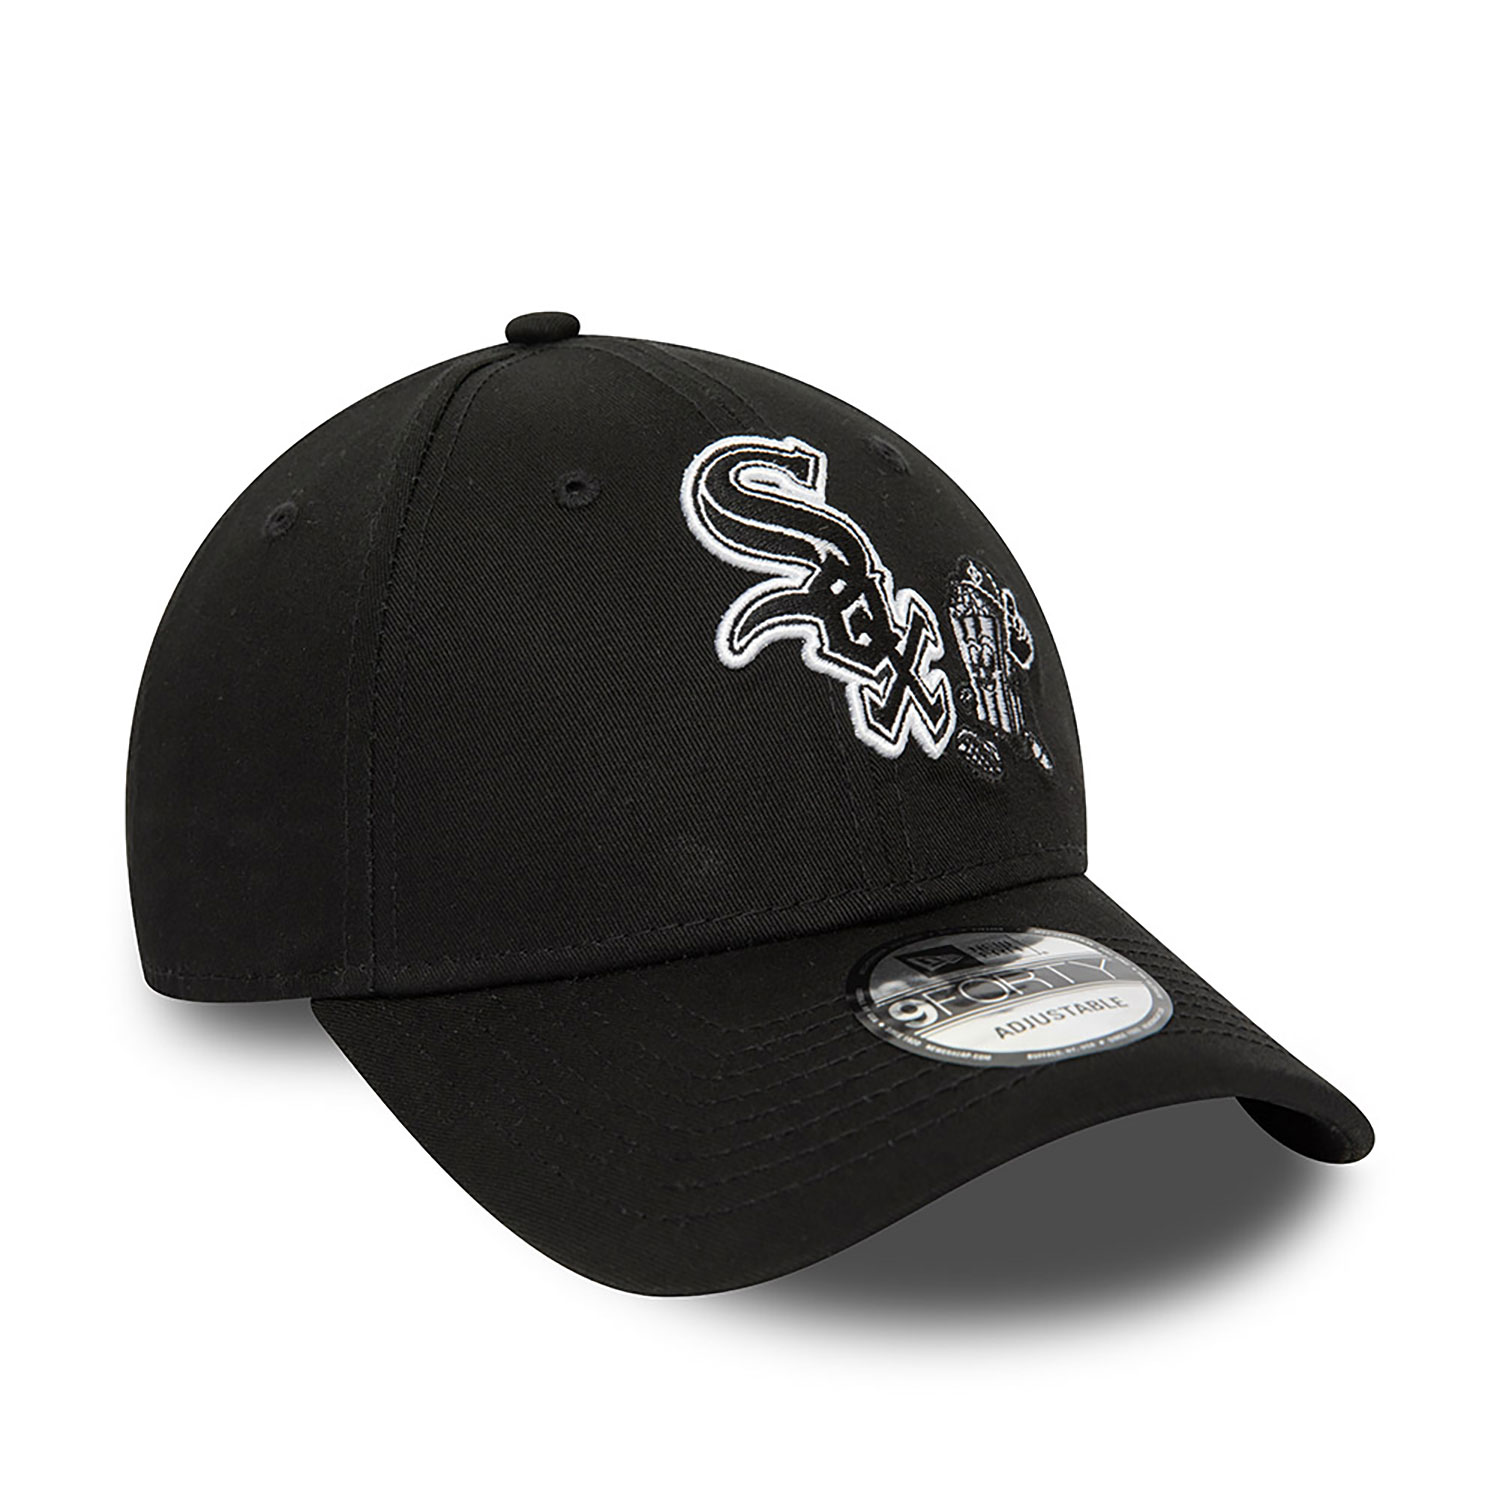 Chicago White Sox Food Character Black 9FORTY Adjustable Cap